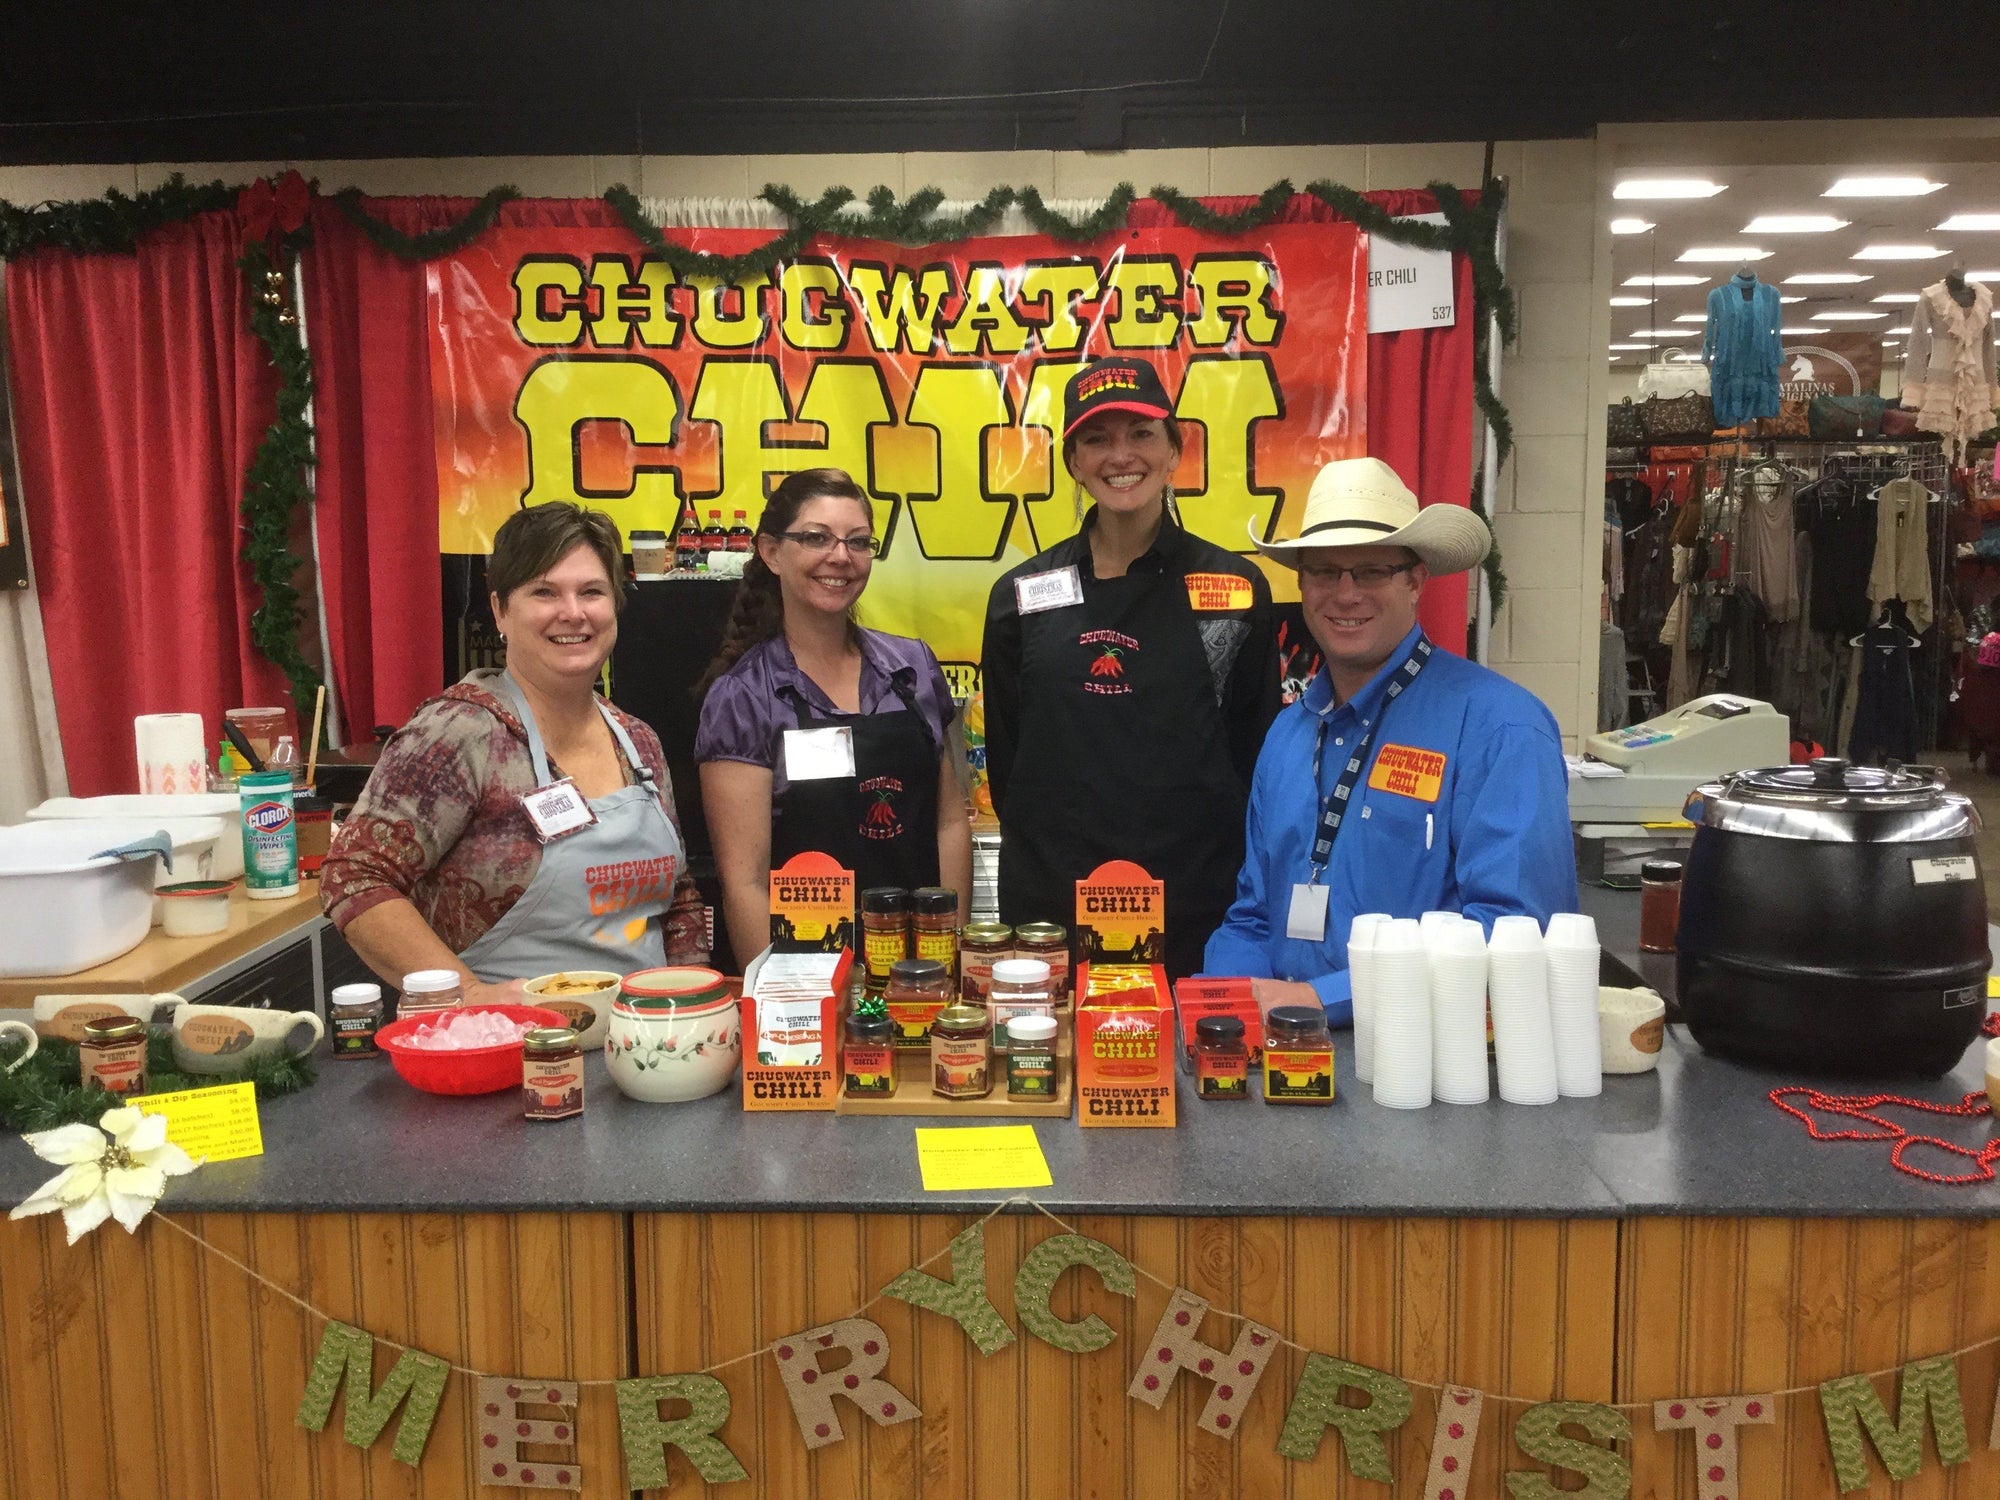 Chugwater Chili is on the road.